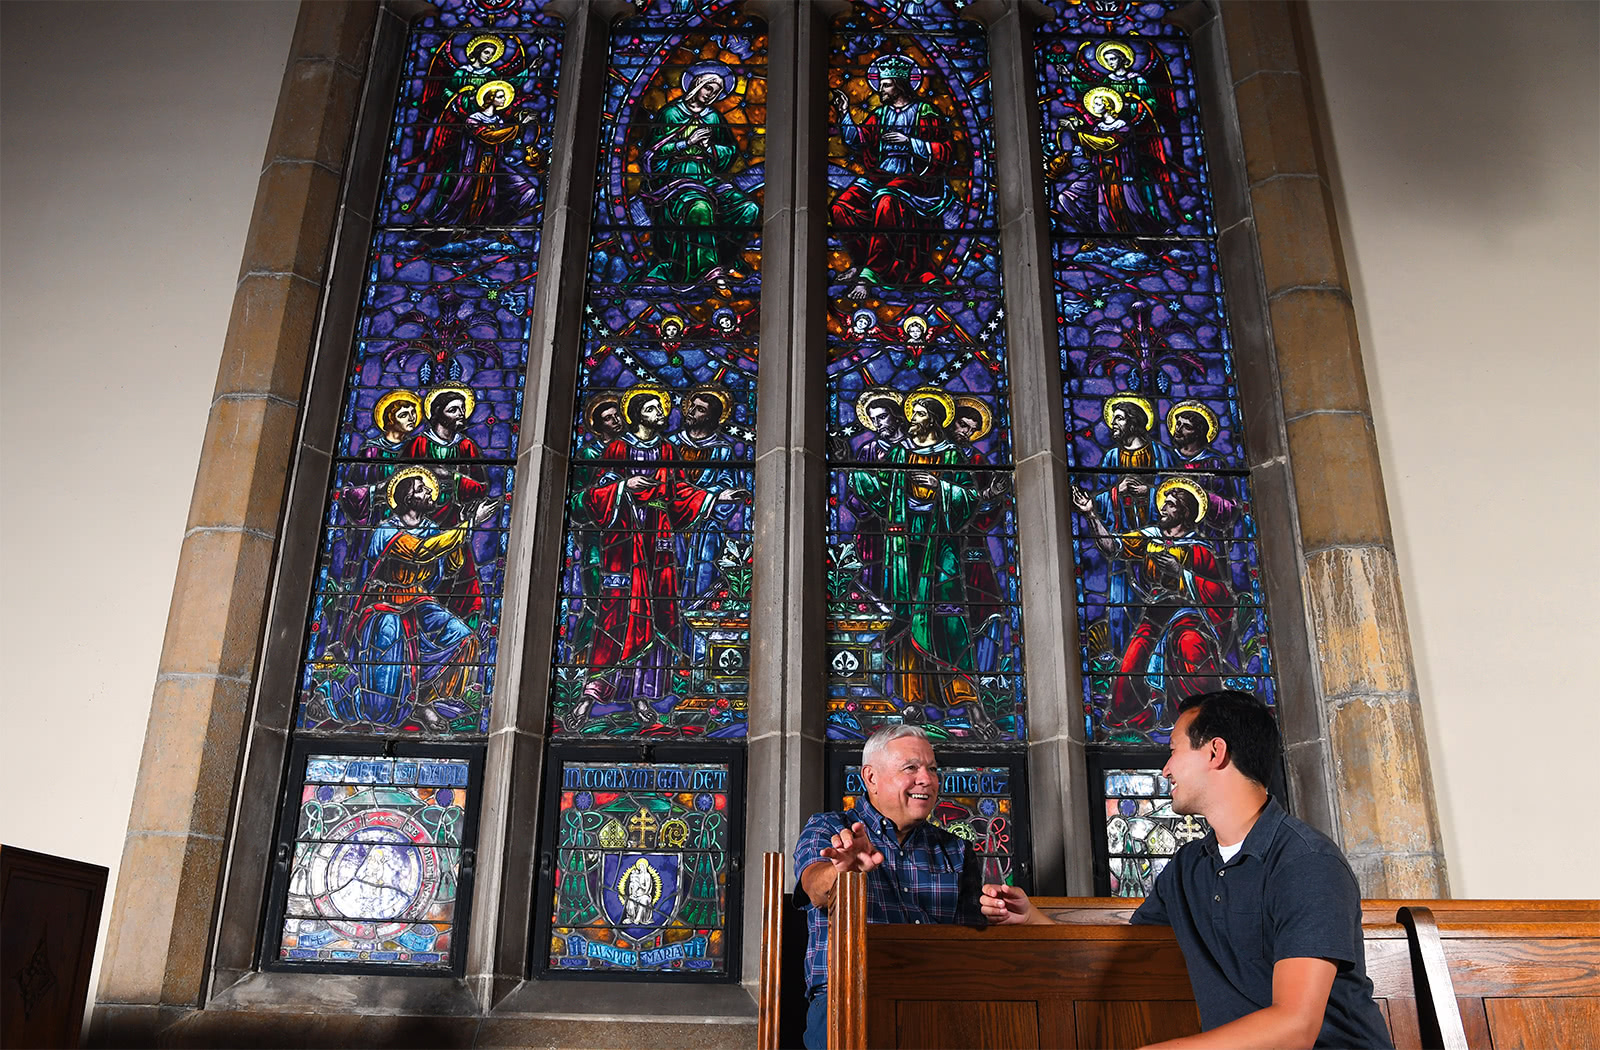 Two people sitting in front of a large, colorful, stained glass window talking and smiling